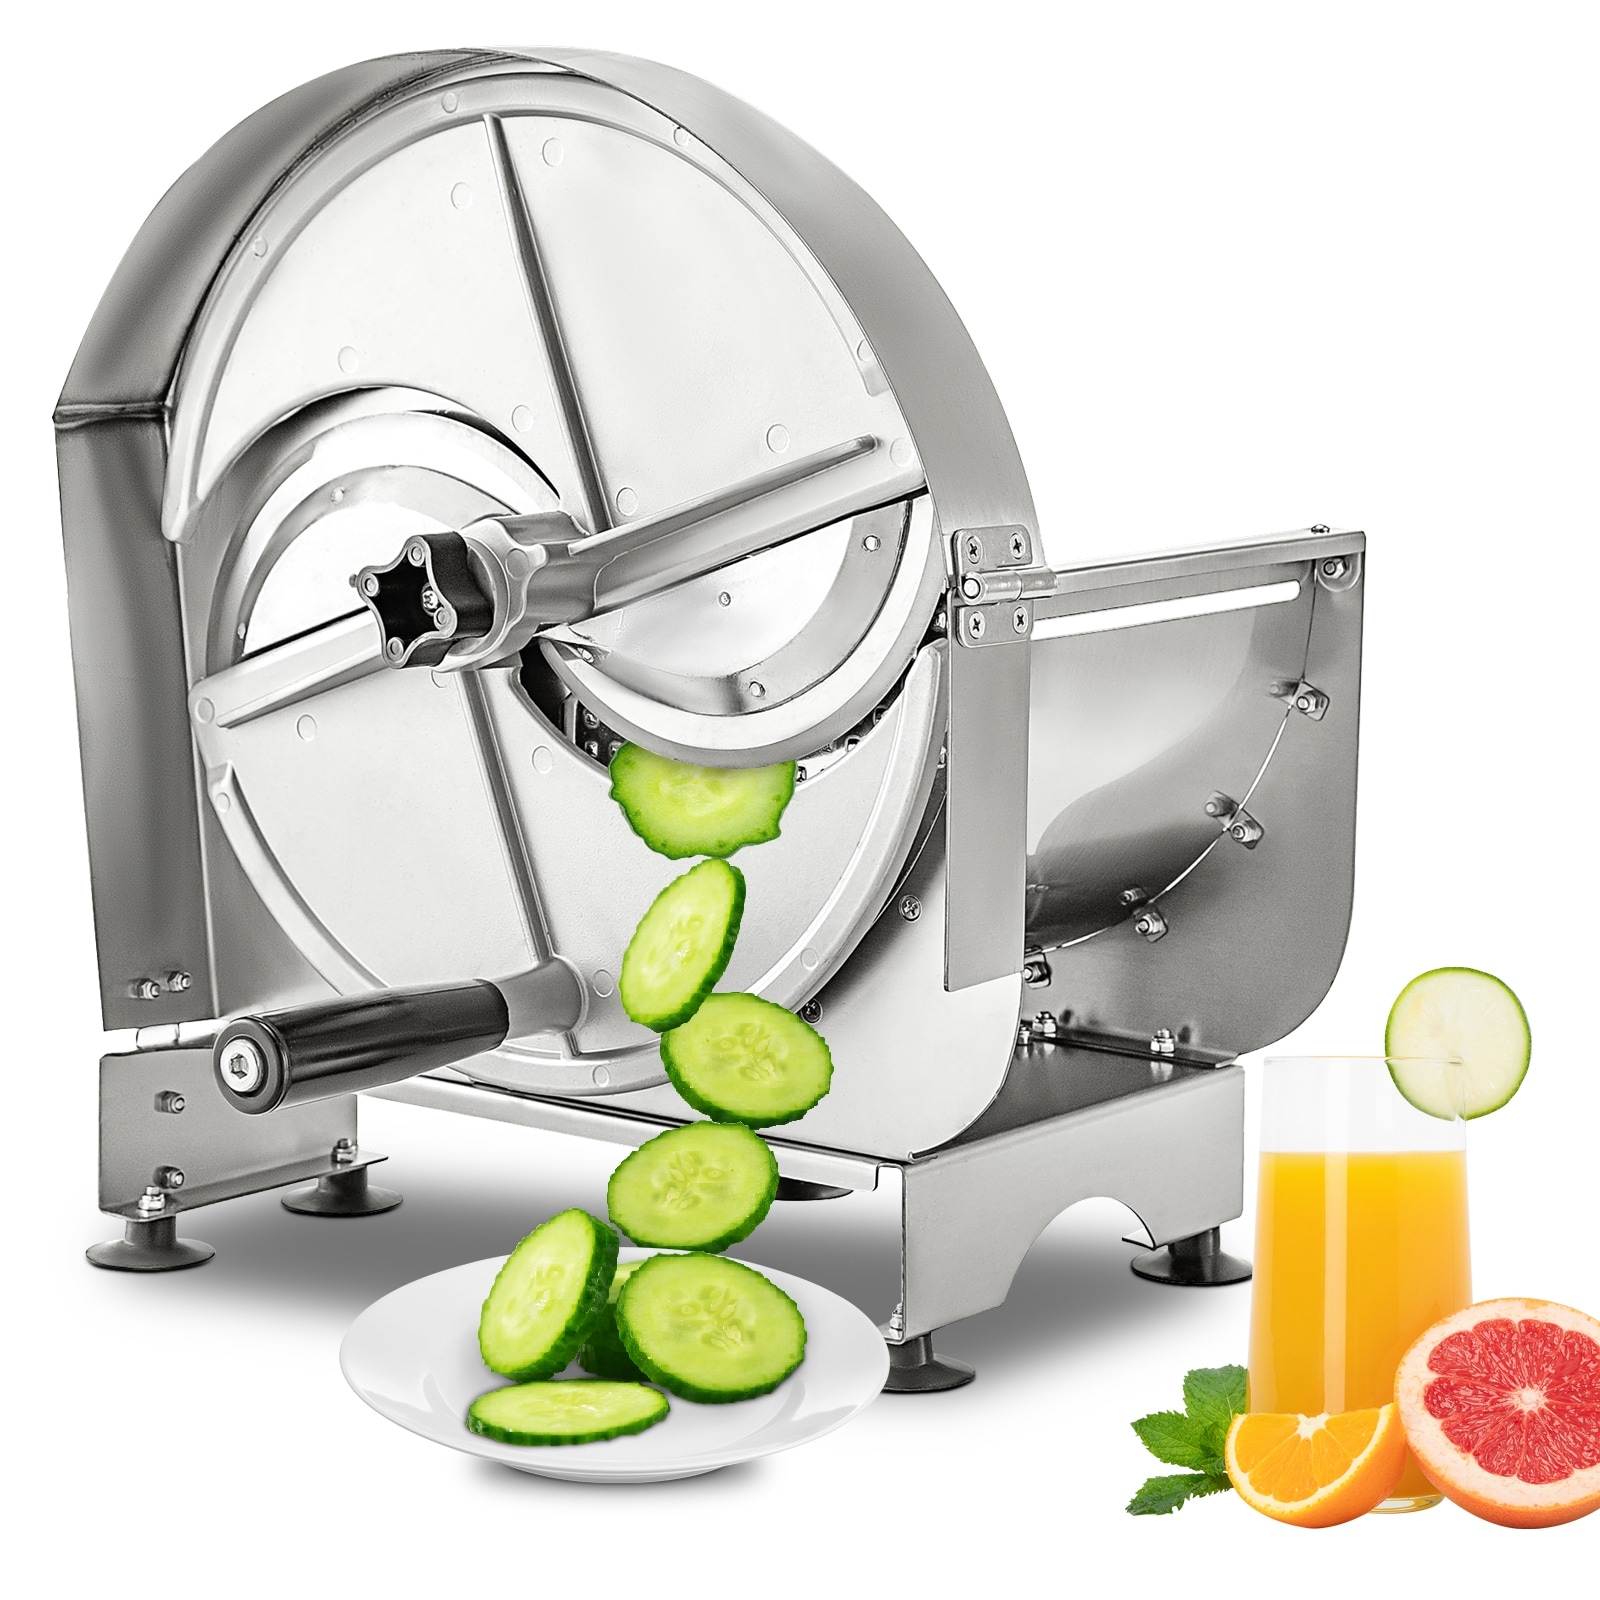 https://ak1.ostkcdn.com/images/products/is/images/direct/fb23f1bb6a83f59805e65142dac9c69c88cbce0d/VEVOR-Commercial-Manual-Slicer-Adjustable-Thickness-0.2-12-mm-Stainless-Steel-Fruit-Slicer-with-Double-Blades.jpg